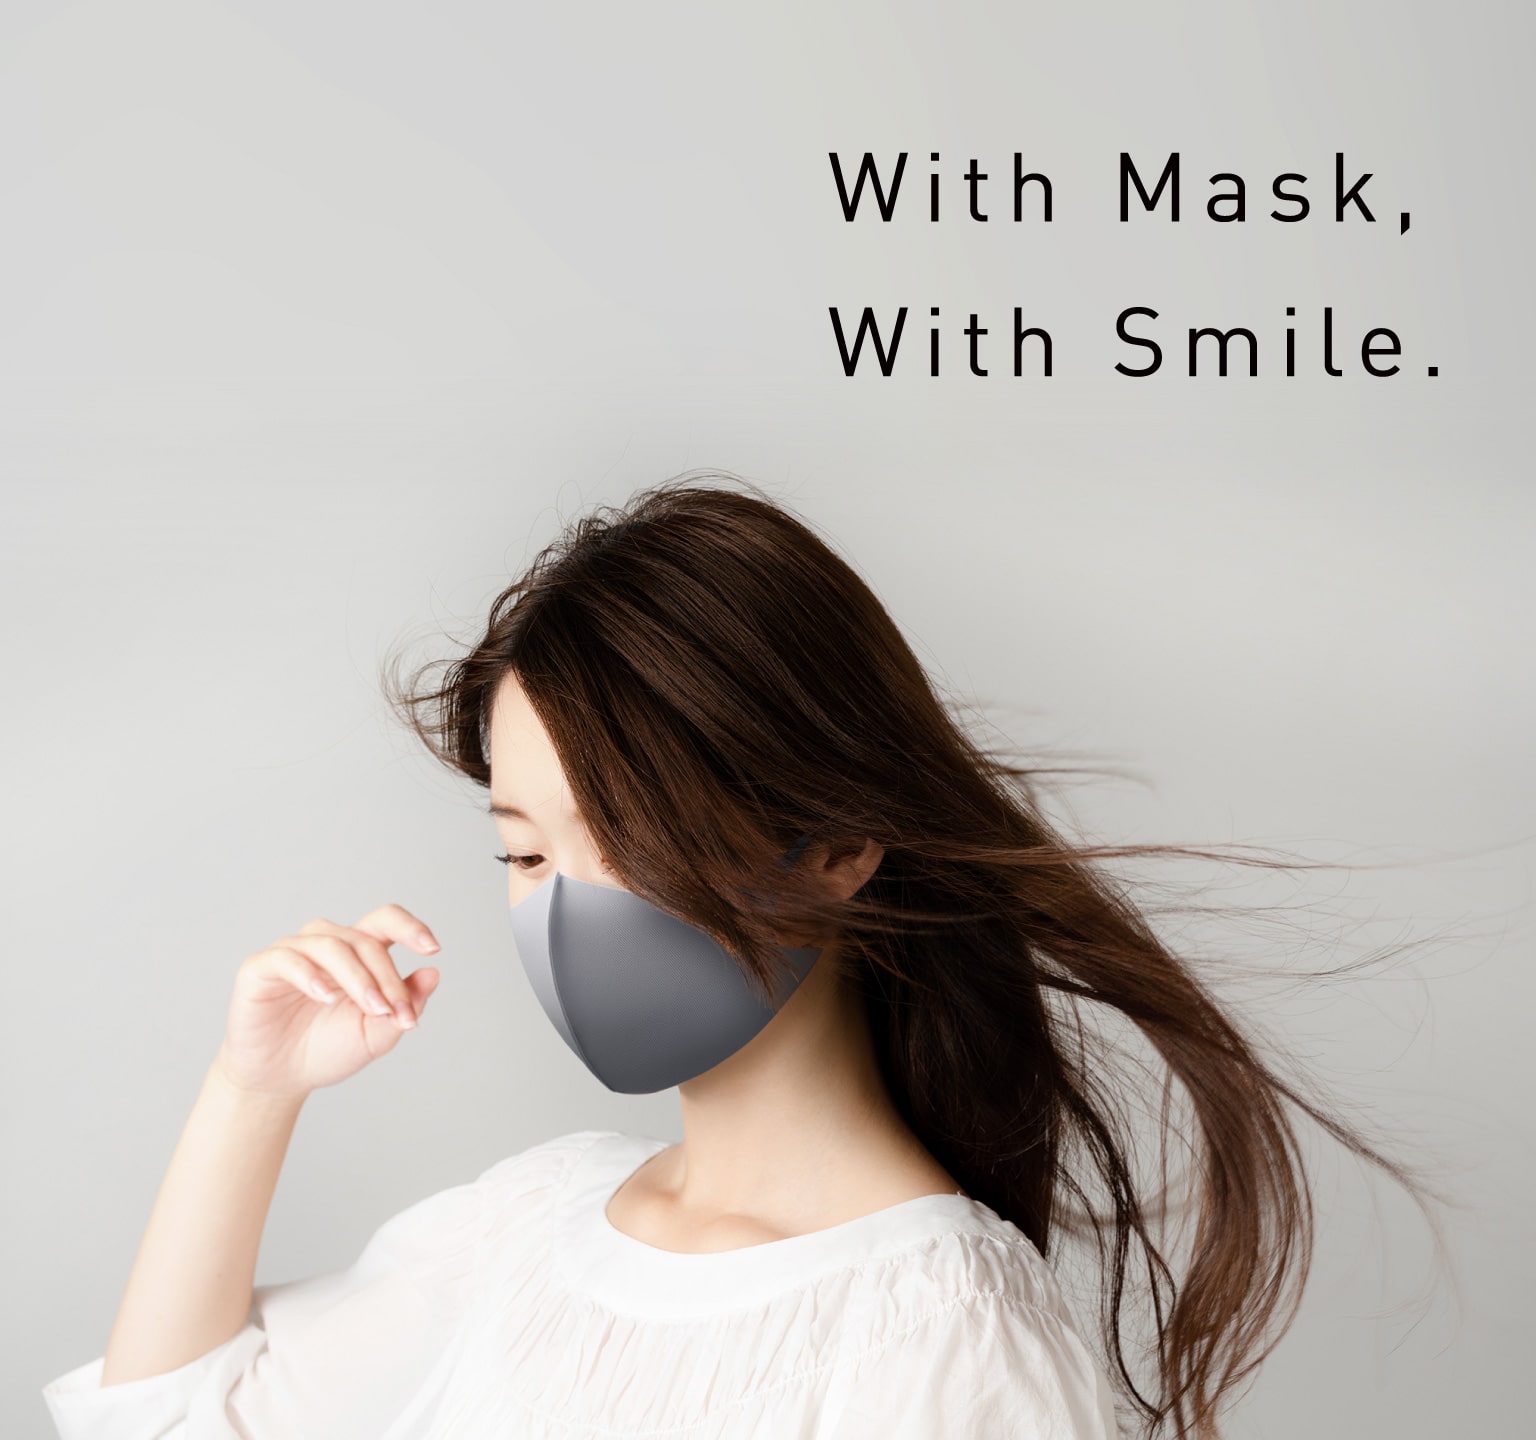 With Mask, With Smile.